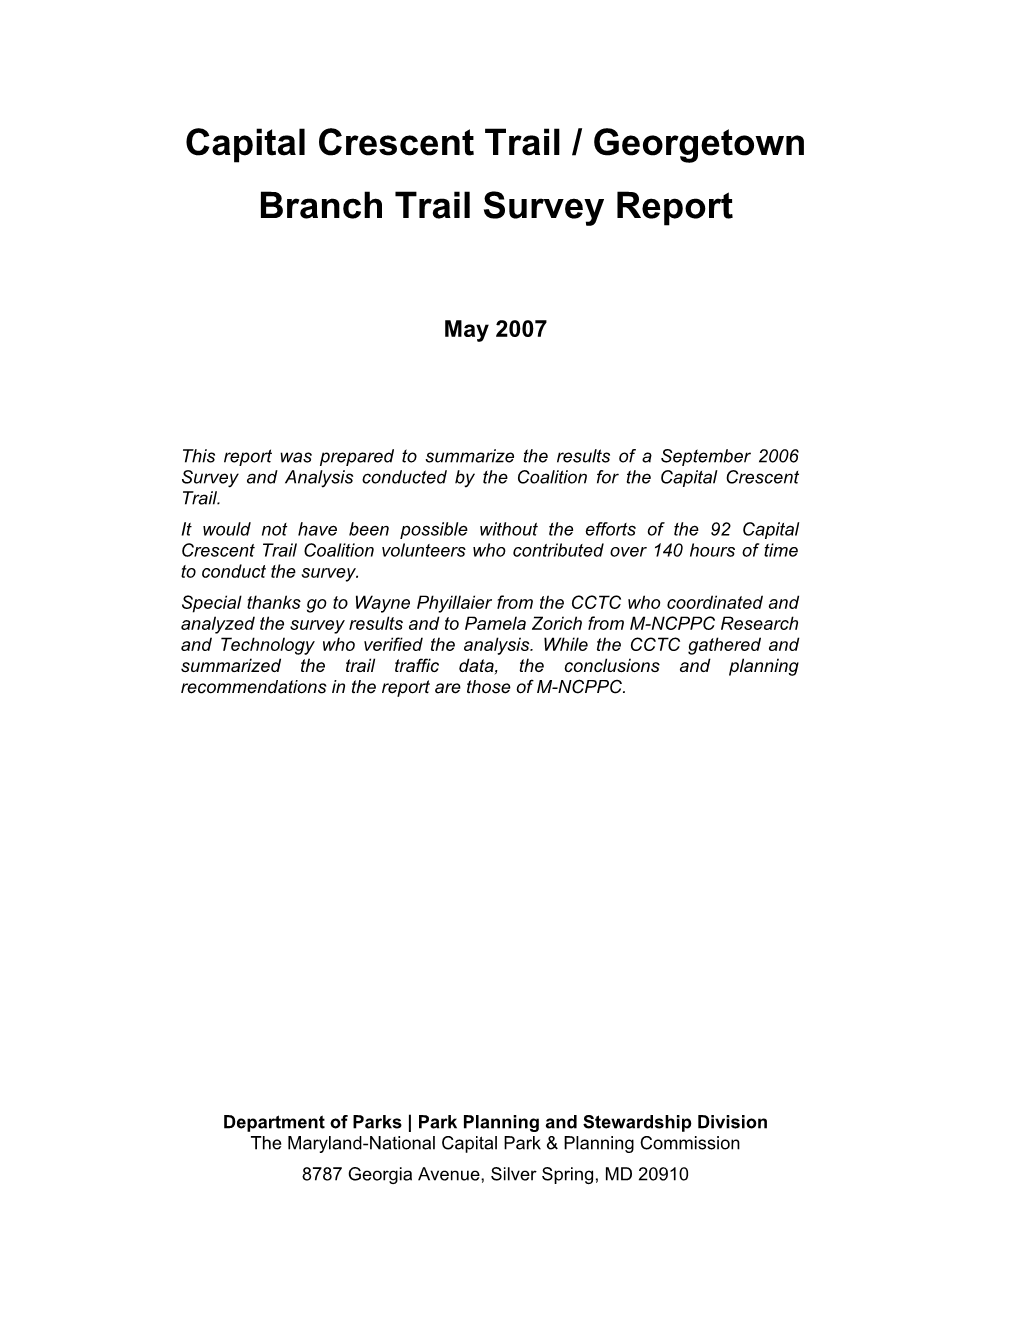 Capital Crescent Trail / Georgetown Branch Trail Survey Report